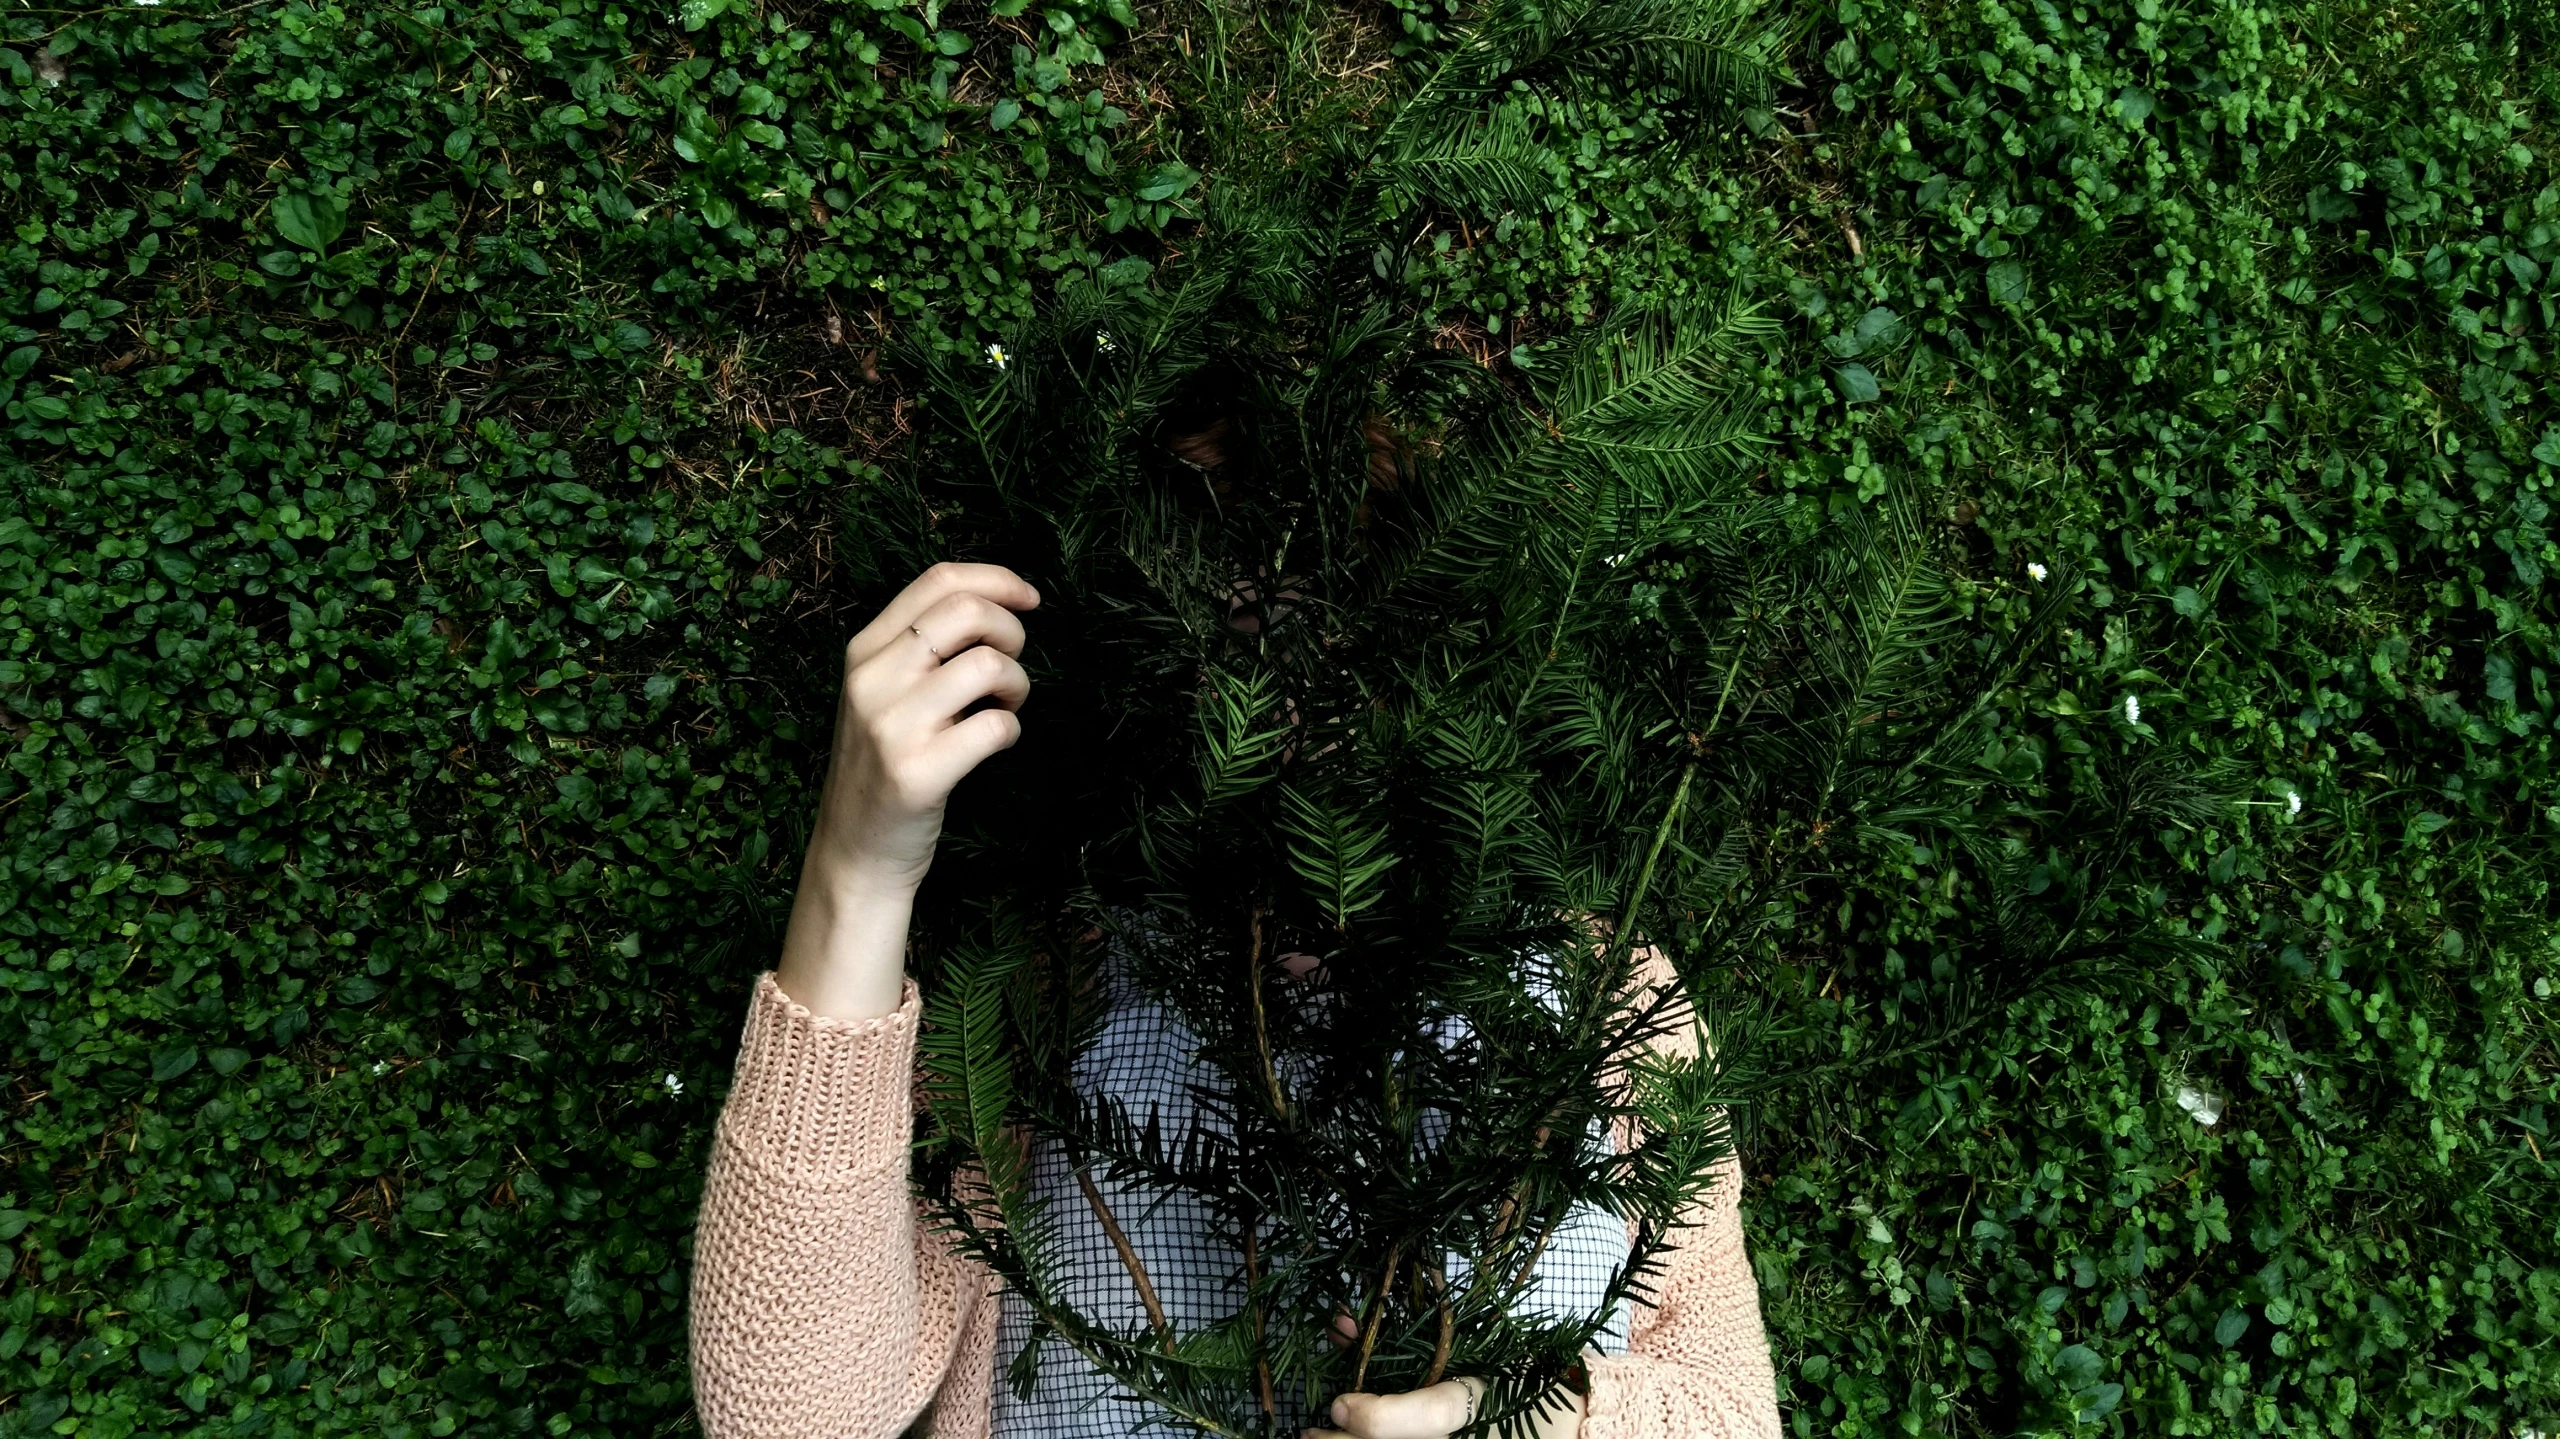 a person is standing in the middle of an area with green bushes